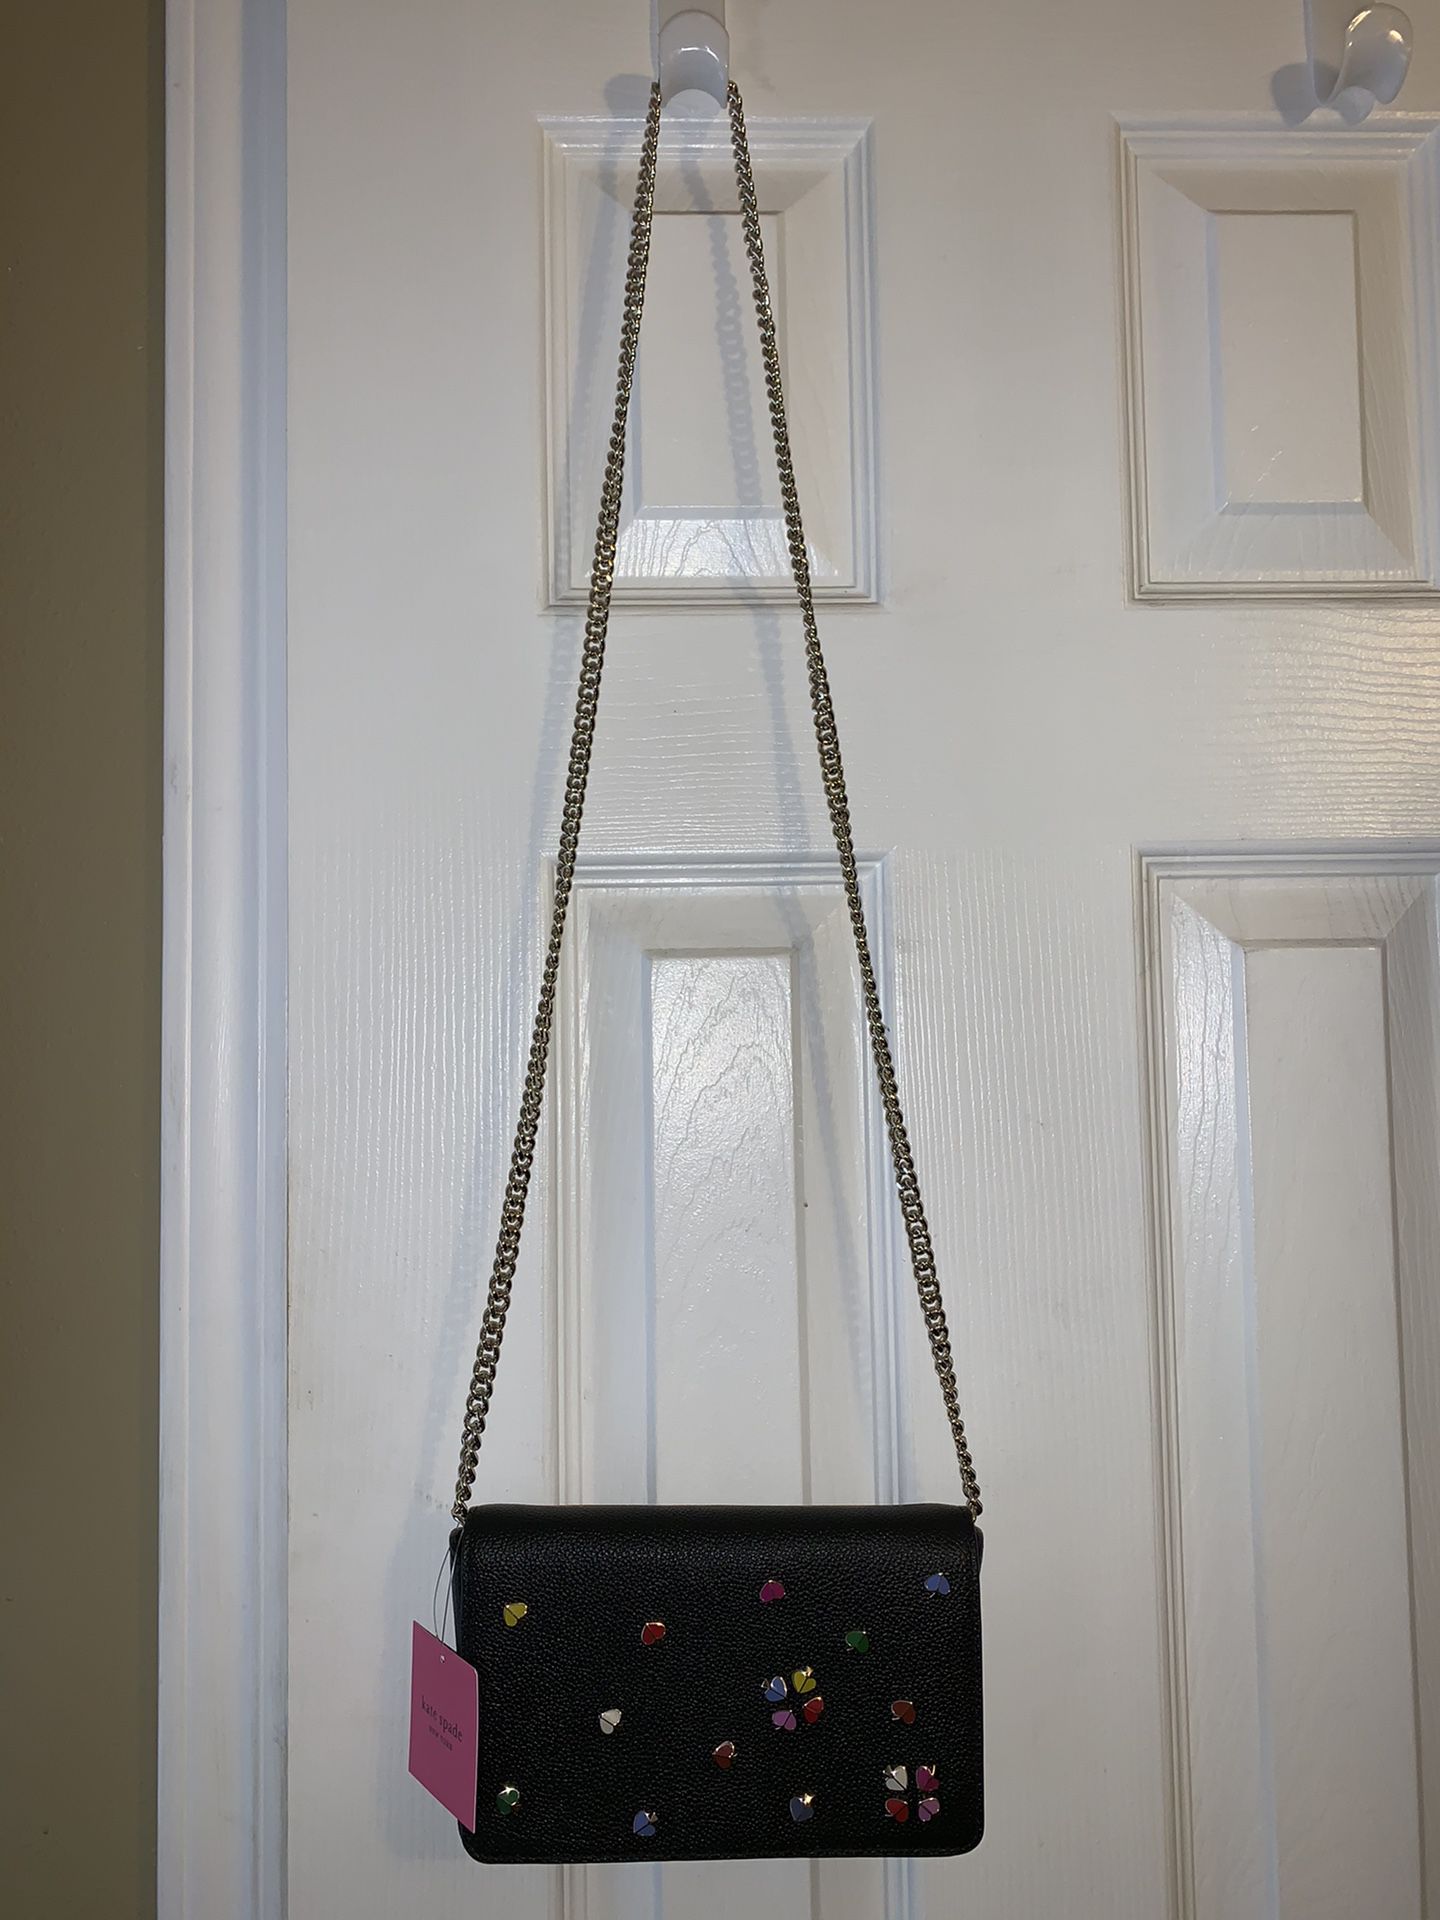 BRAND NEW Kate Spade Chain Wallet!!